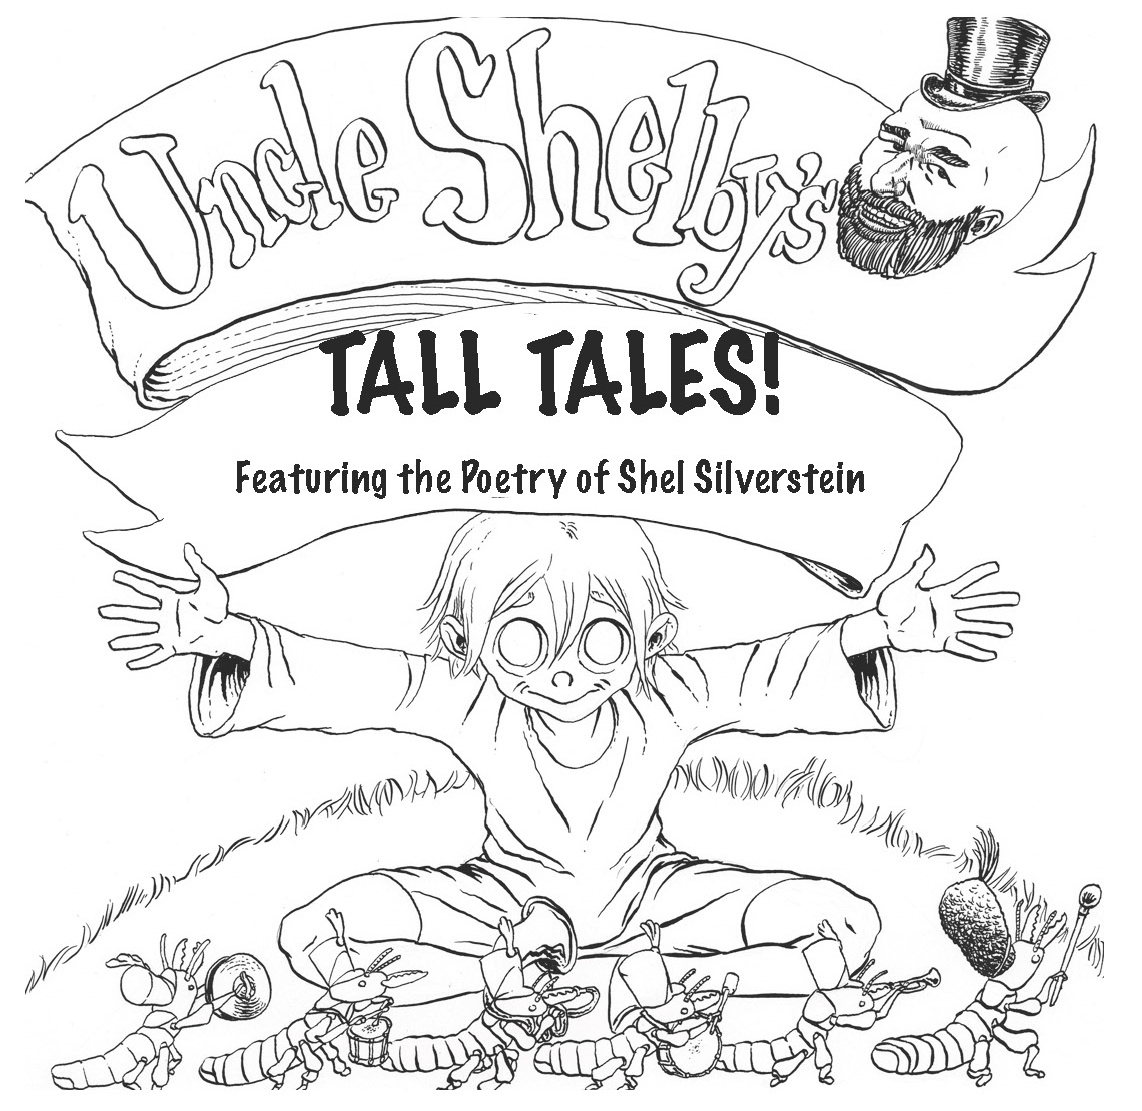 Meet the Youth Cast of Uncle Shelby’s Tall Tales!